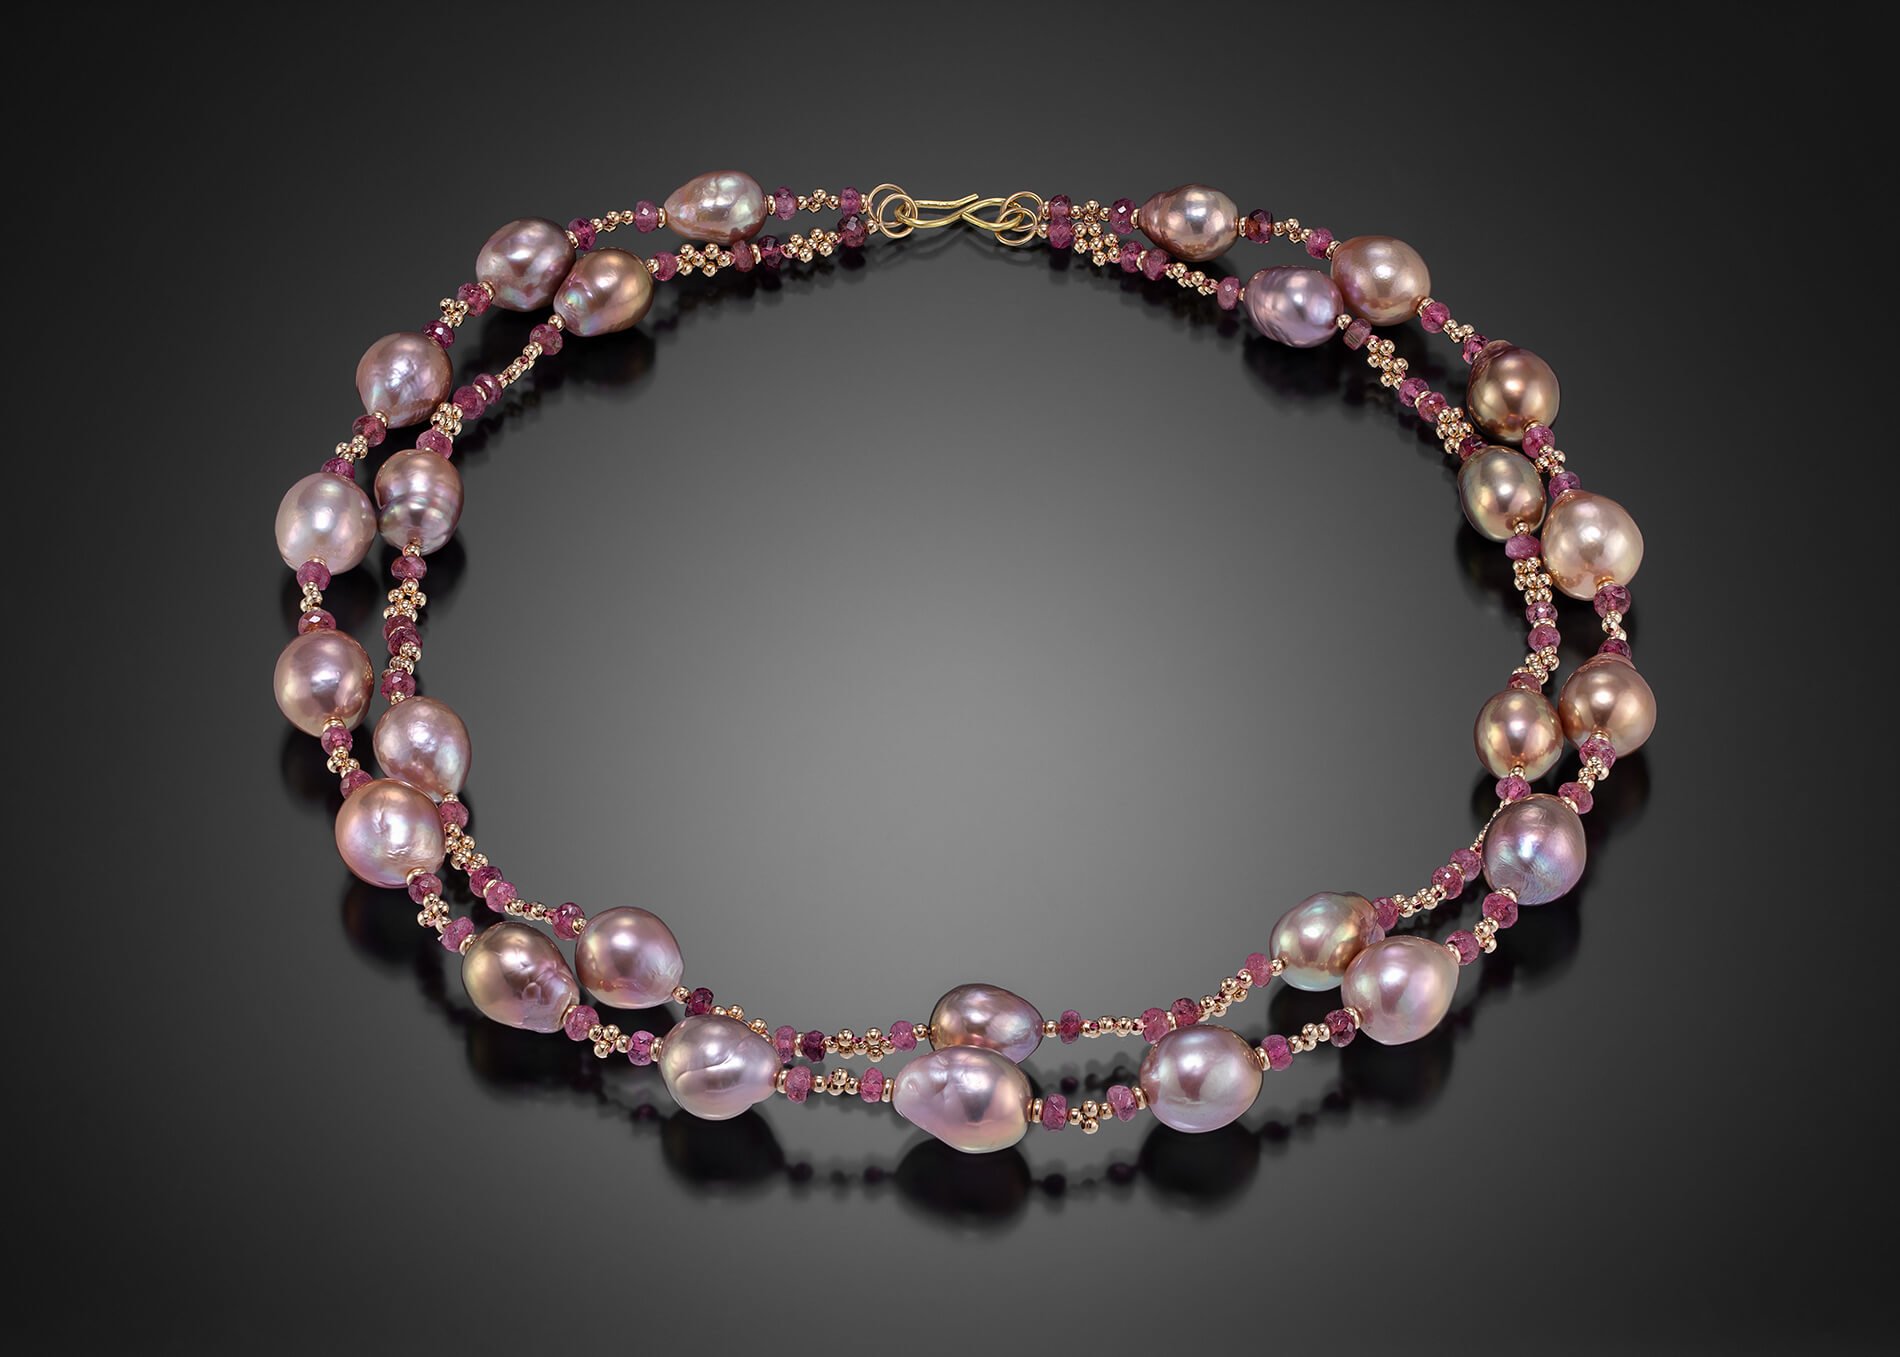 Mauve Pearl Necklace. This necklaces consists of two strands of natural mauve, baroque pearls, separated by woven gold and pink tourmaline beads.